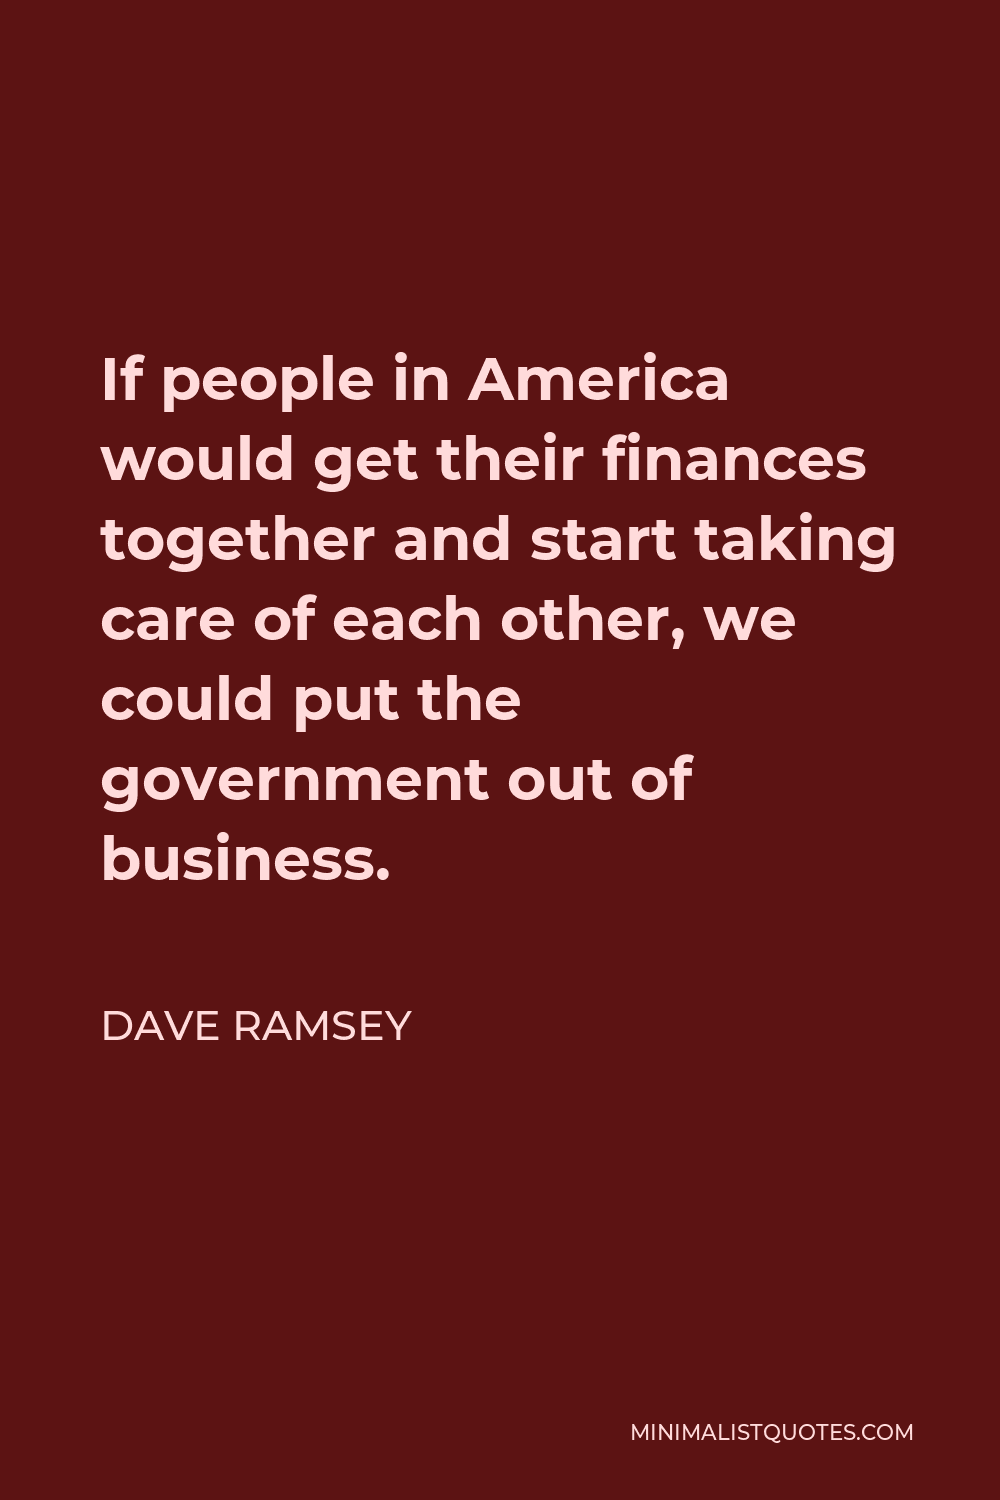 Dave Ramsey Quote - If people in America would get their finances together and start taking care of each other, we could put the government out of business.